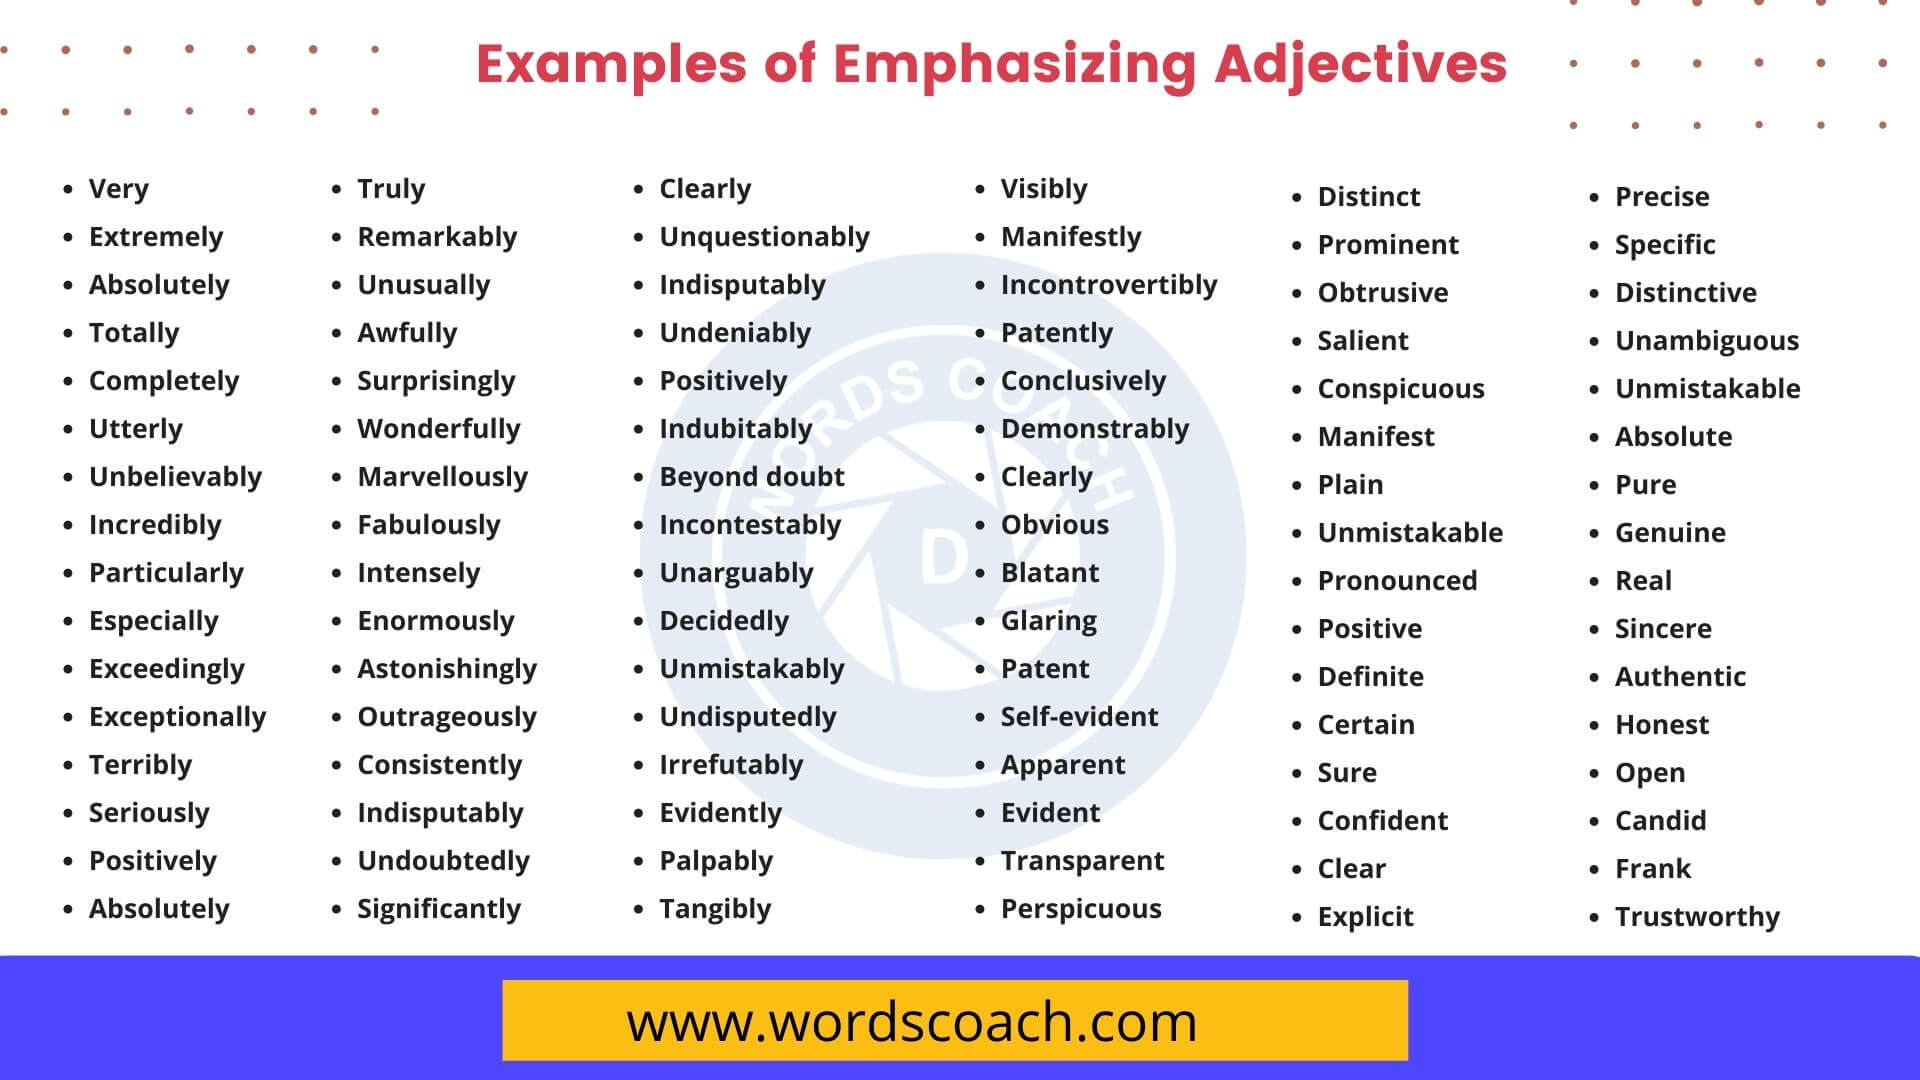 100-examples-of-emphasizing-adjectives-word-coach